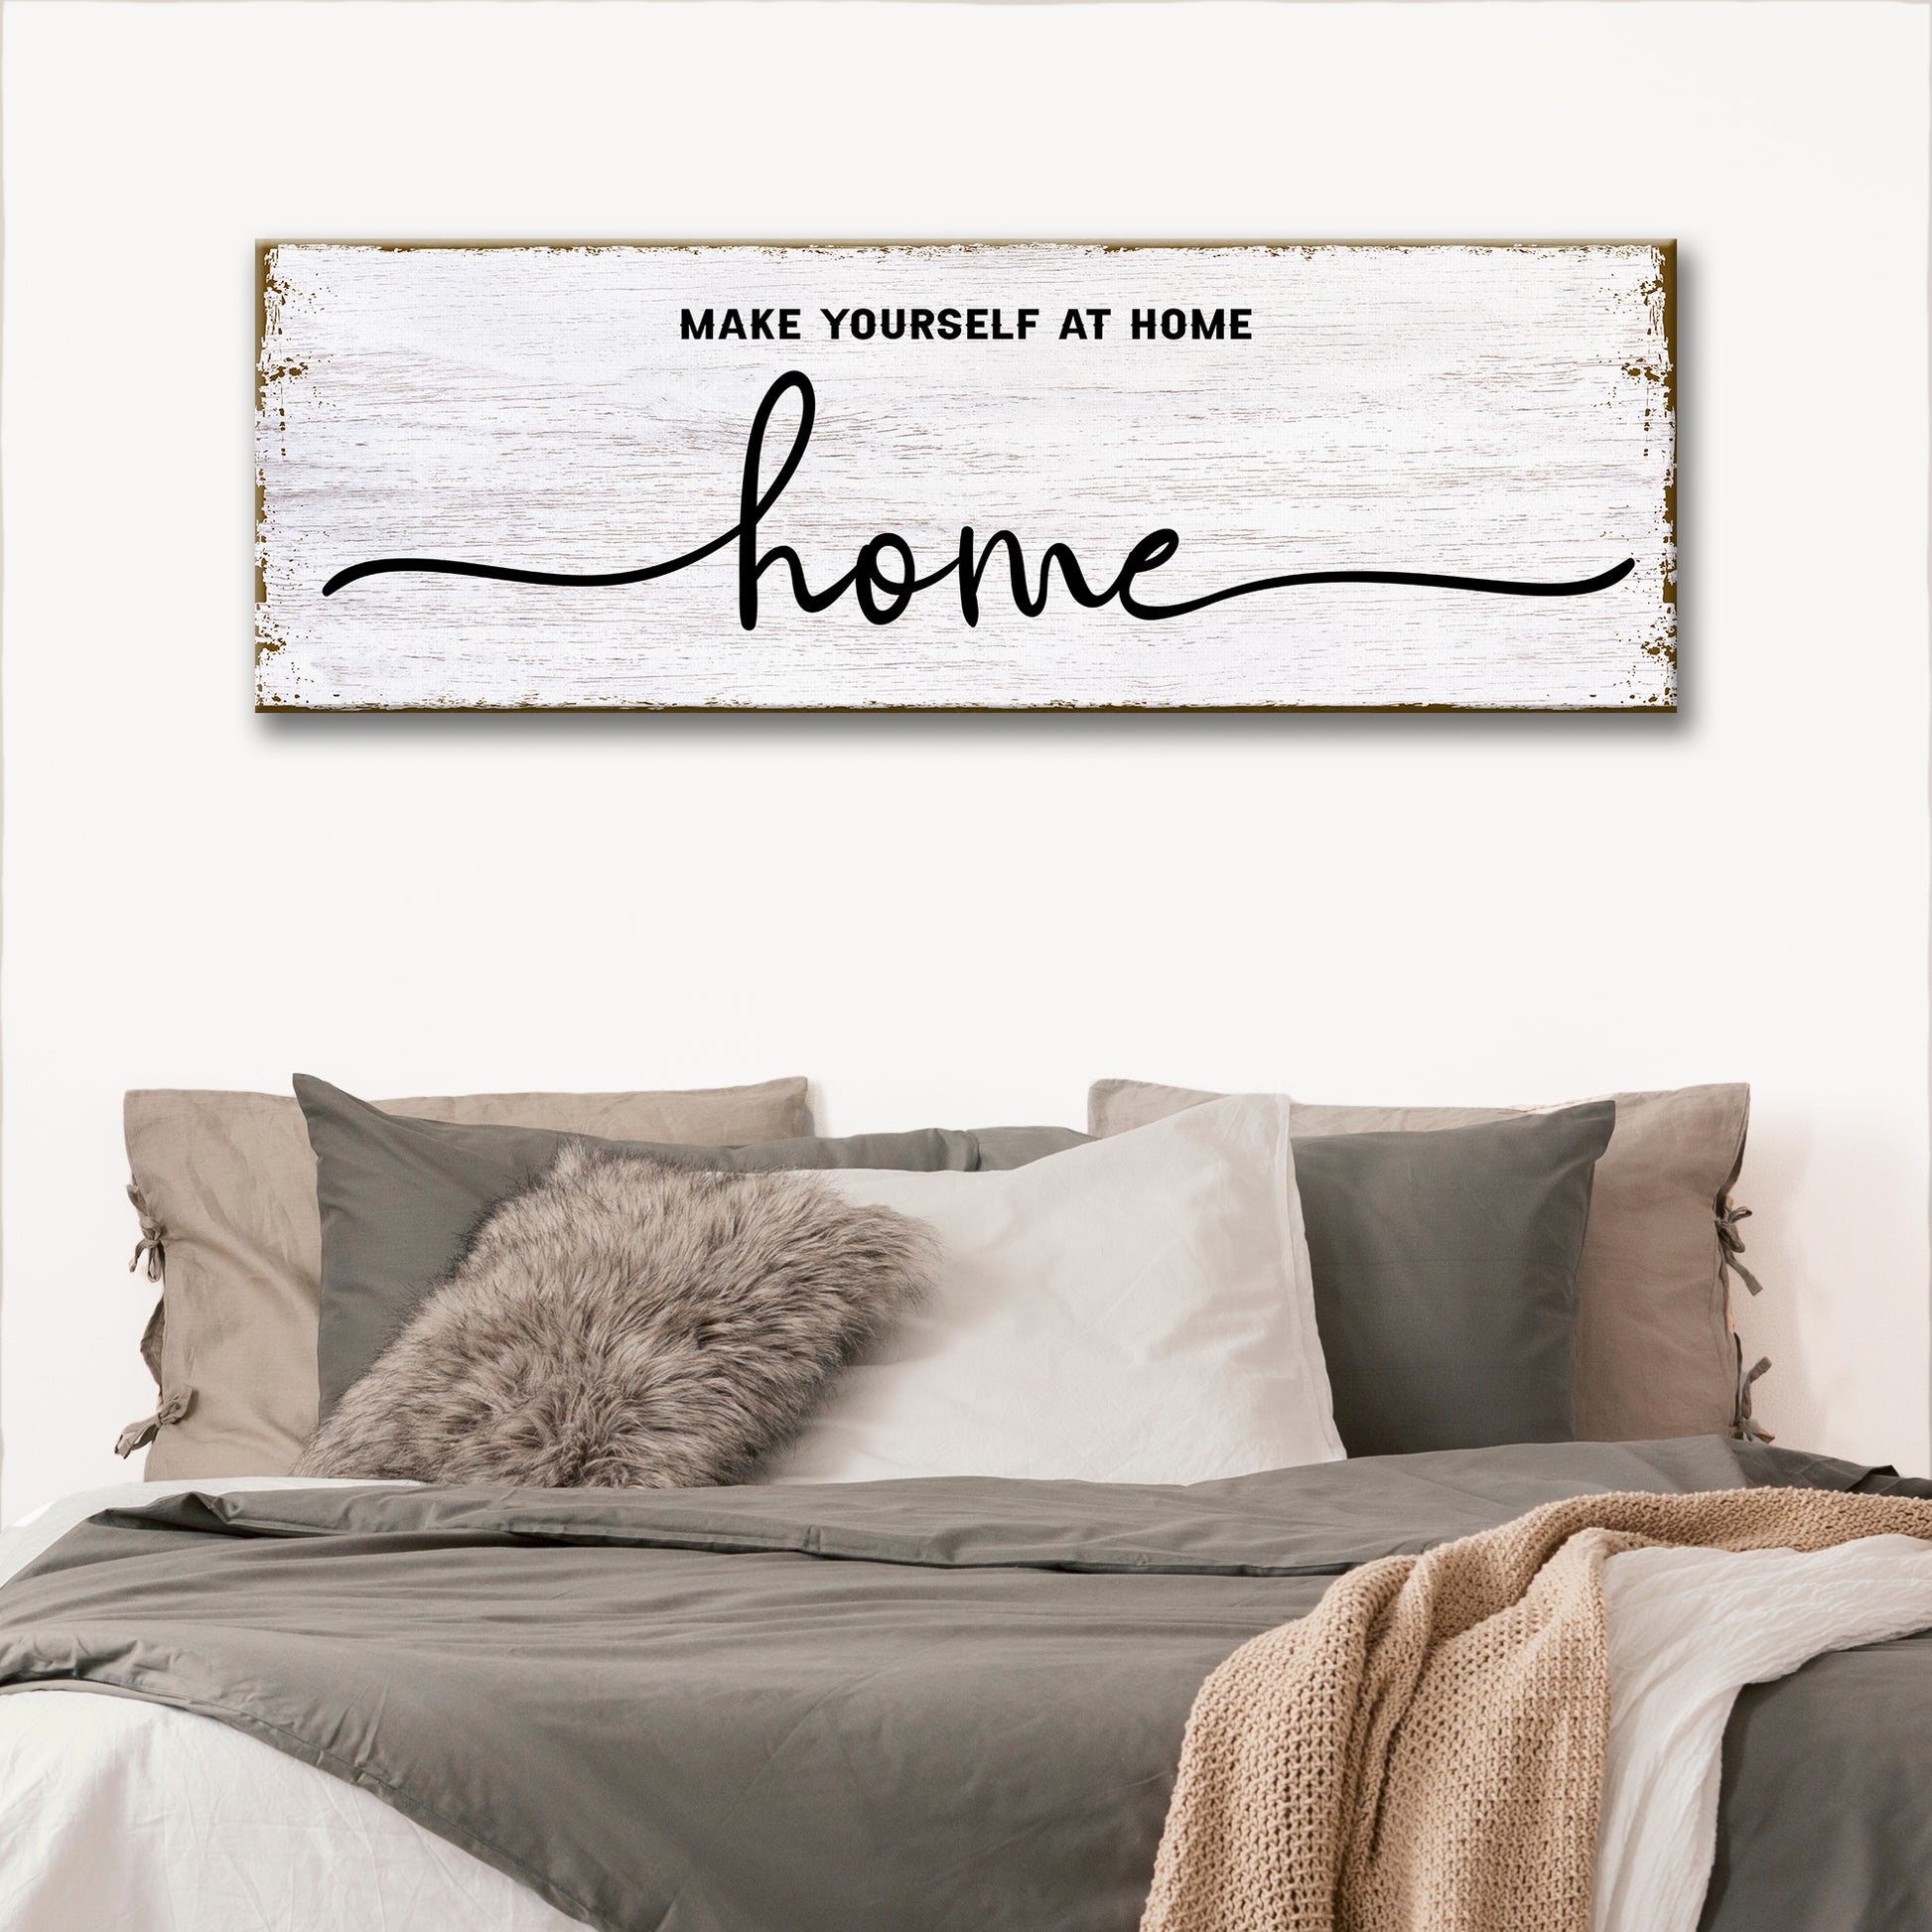 Make Yourself At Home Style 2 - Image by Tailored Canvases